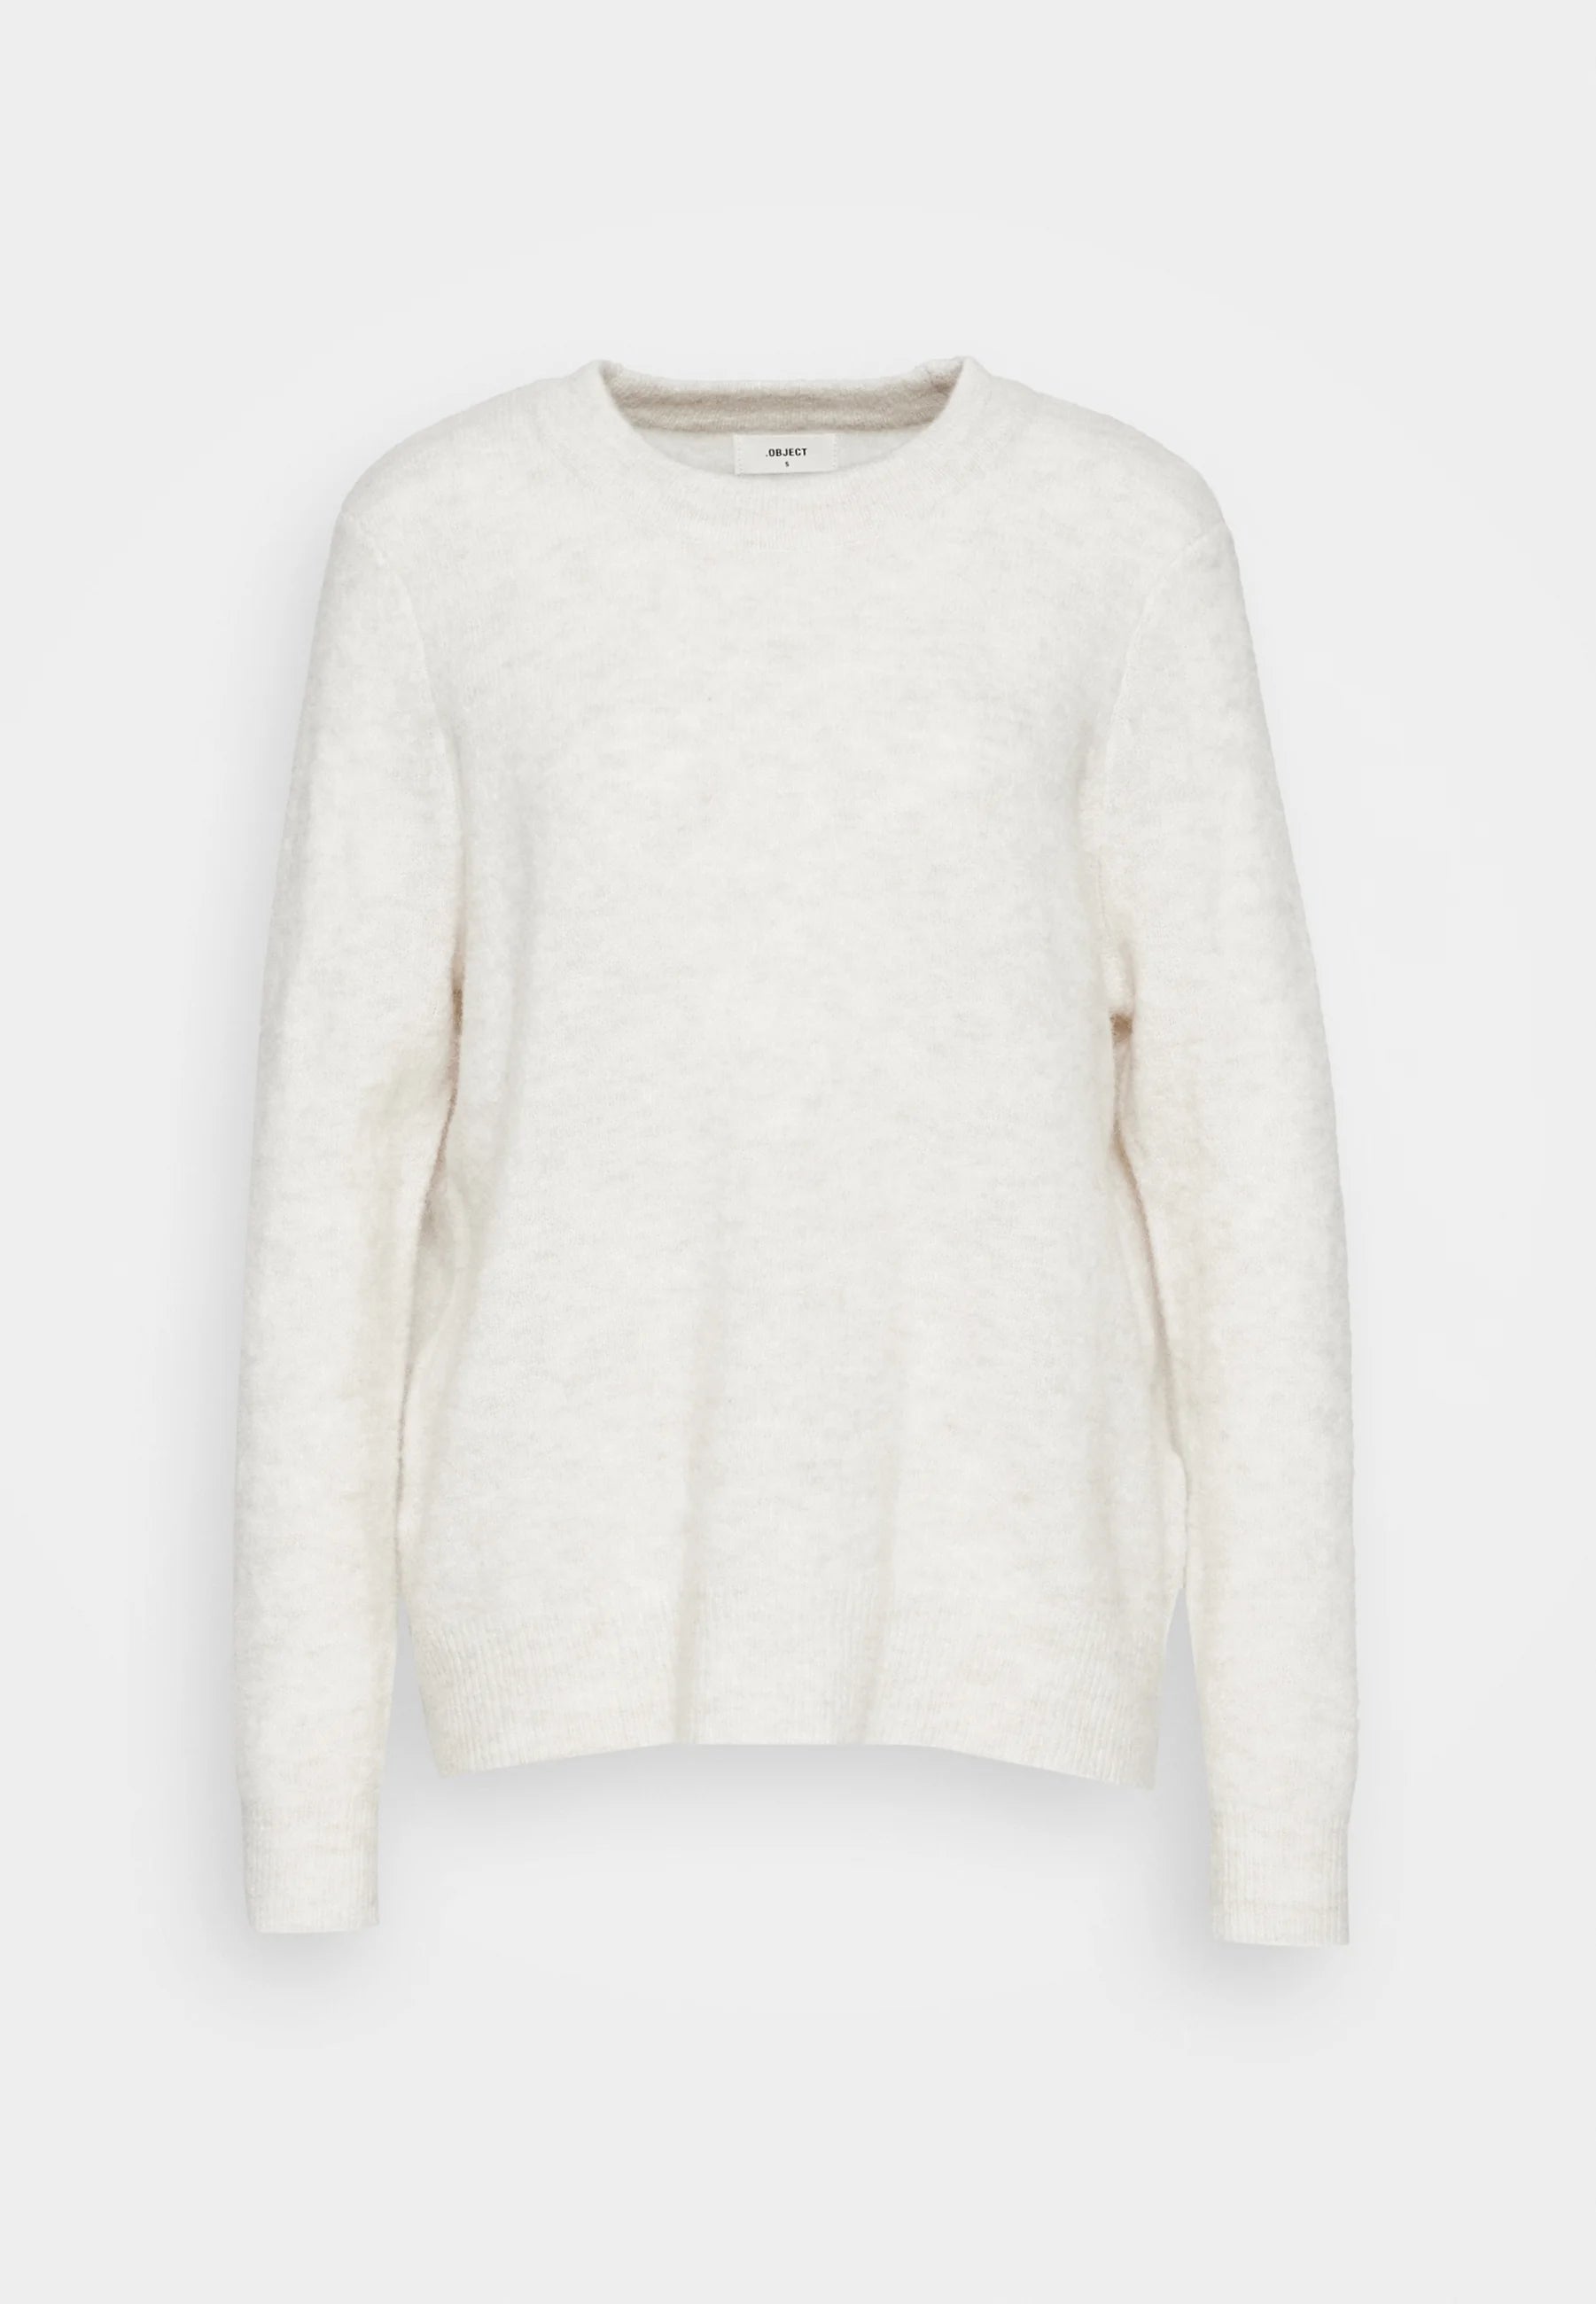 OBJELLIE L/S O-NECK PULLOVER NOOS